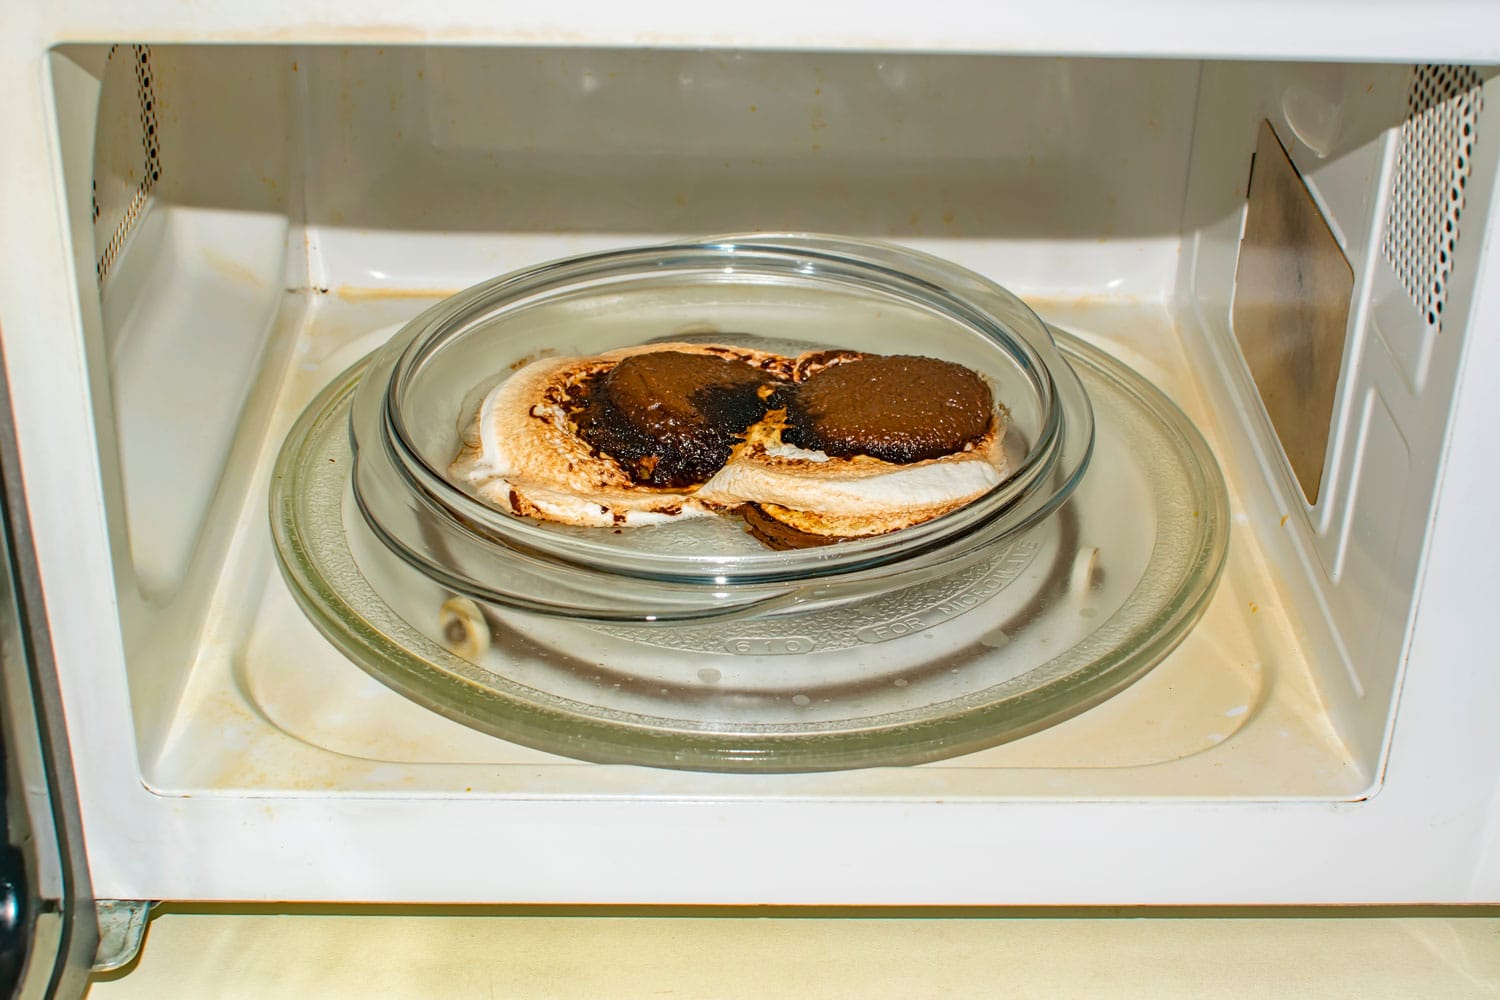 a melted bun, burnt to embers, lies on a plate in the microwave. Spoiled food, sweets
